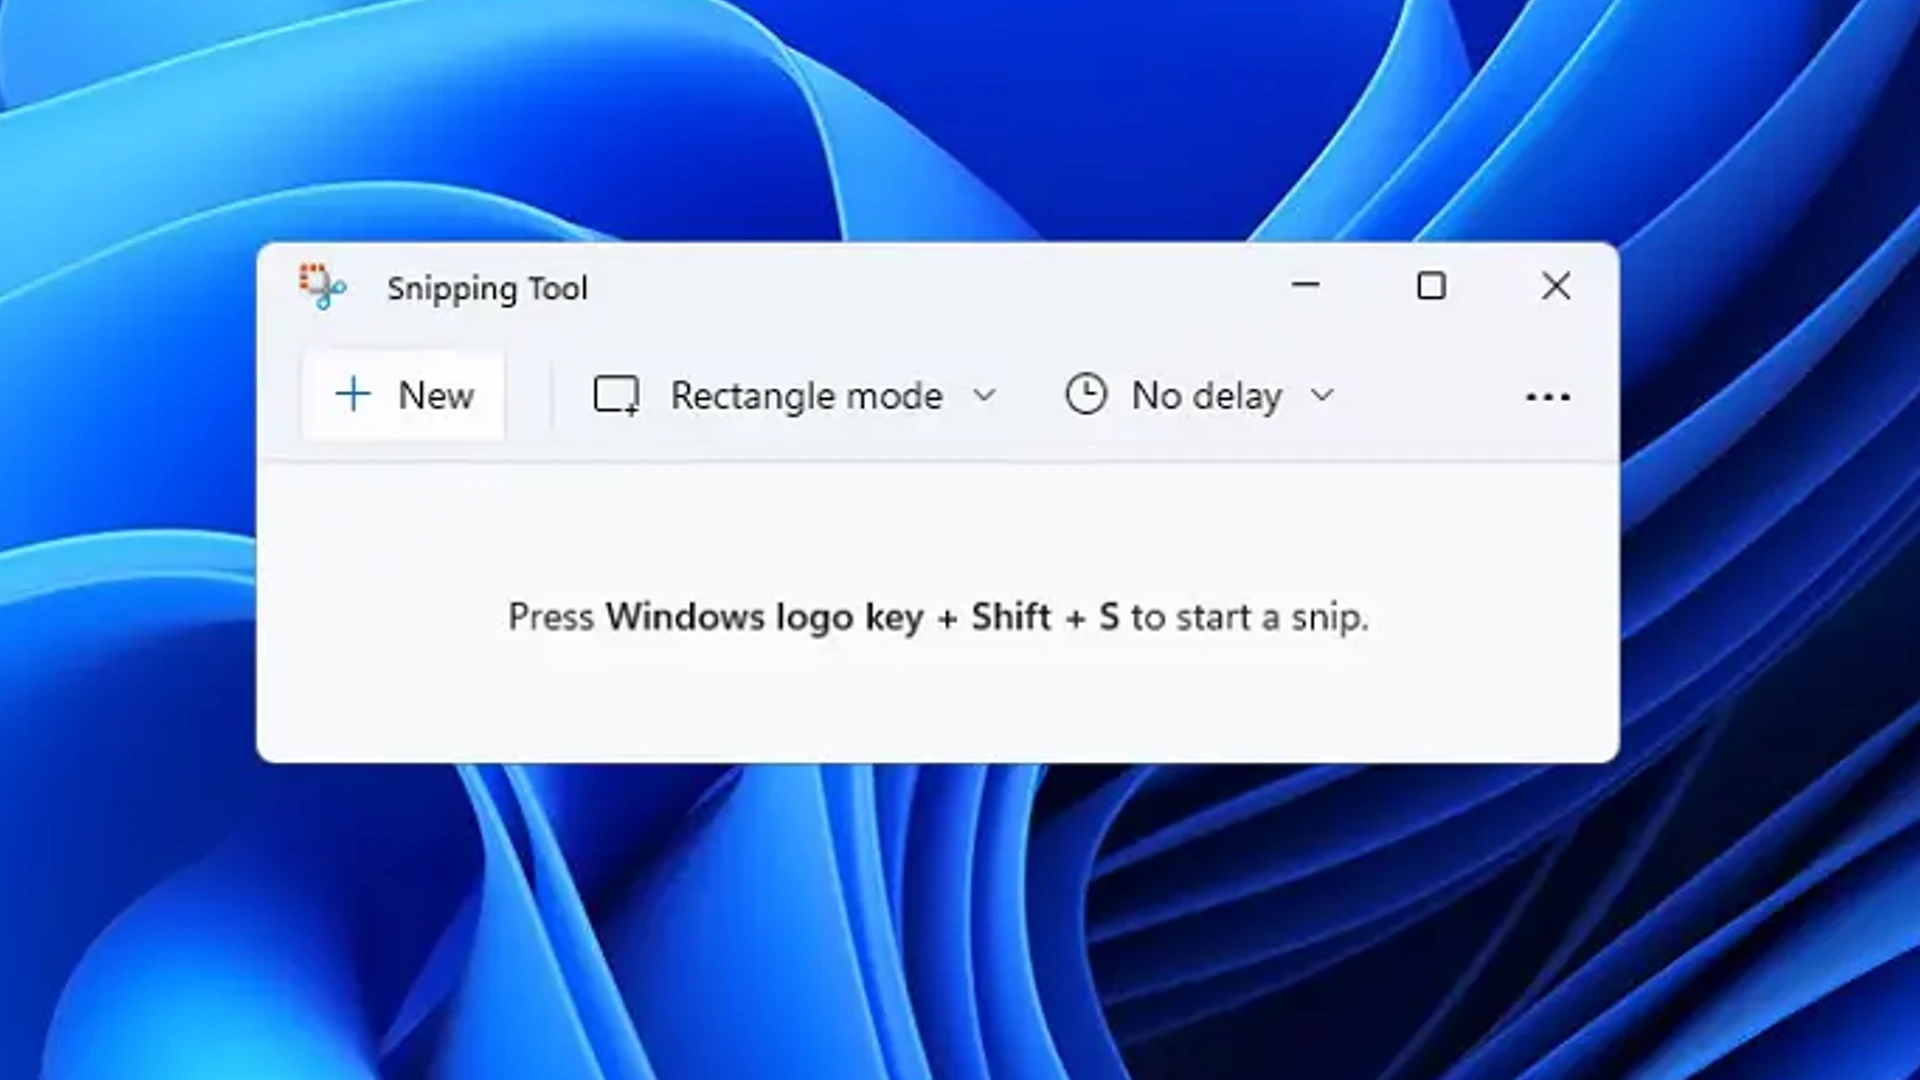 Print Screen key will now open Snipping Tool on Windows 11